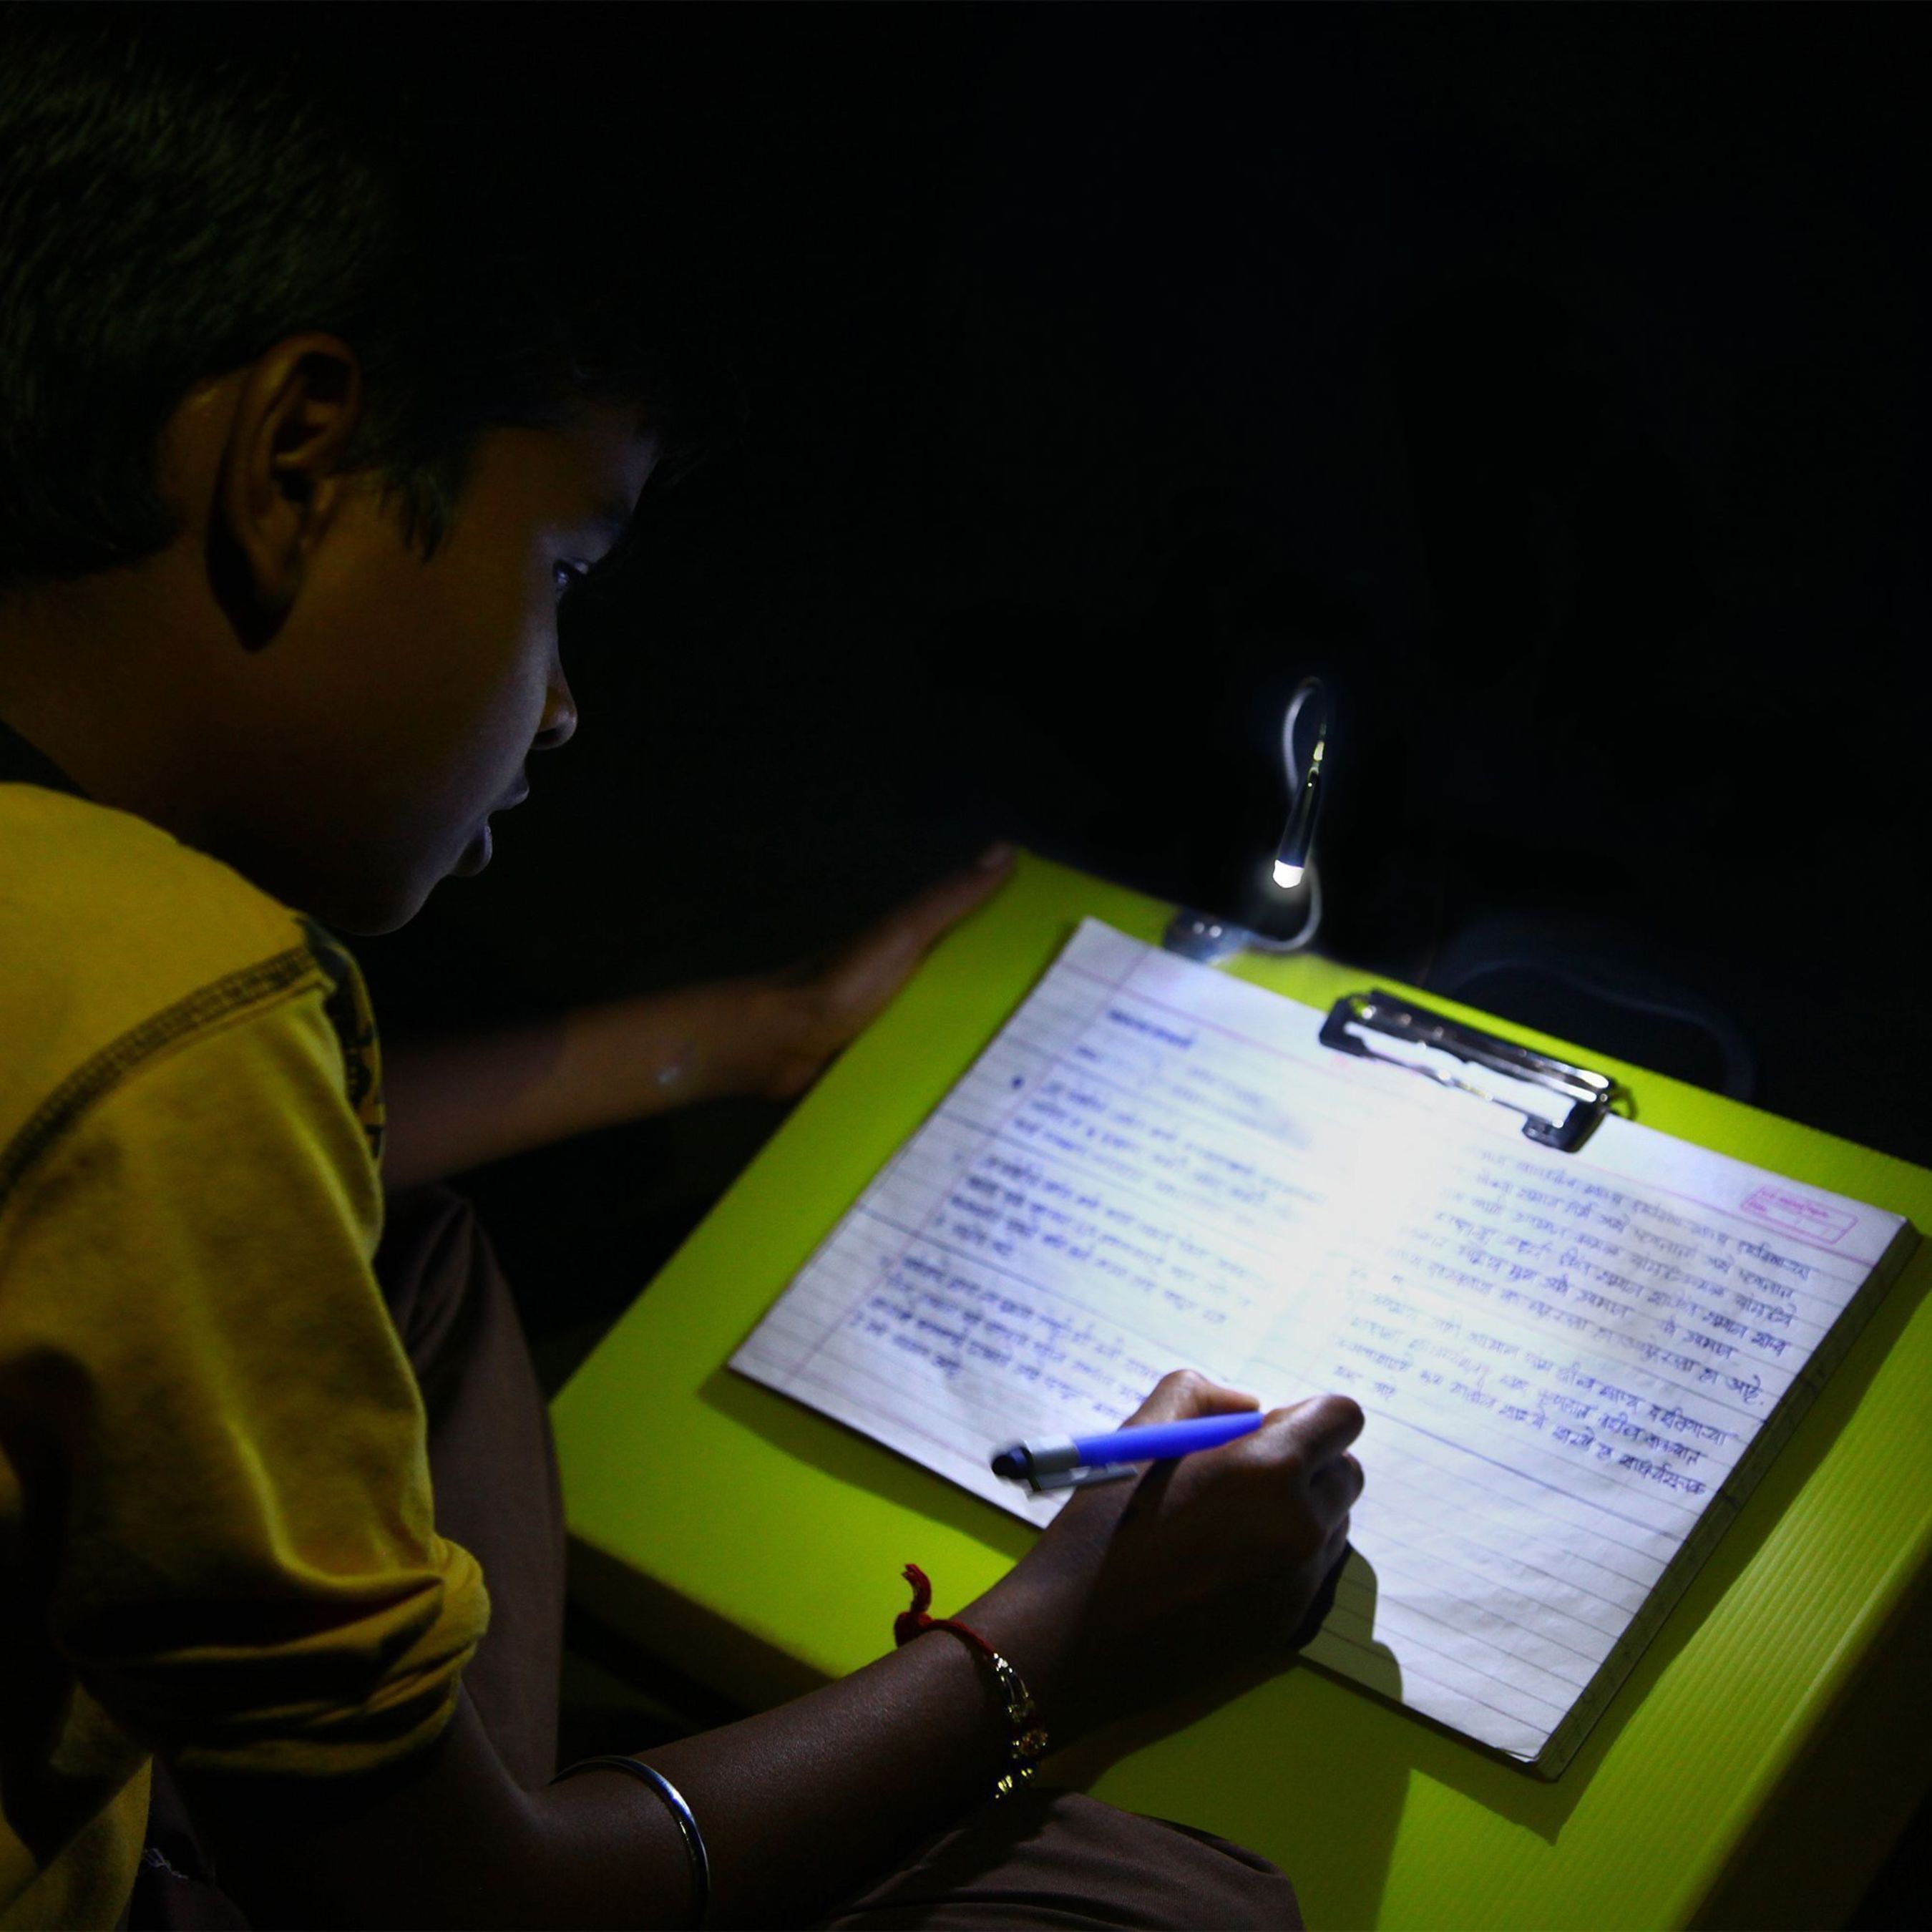 PR NEWSWIRE INDIA: YELO comes with a LED light source and Solar Kit for students in remote areas to study at night. (PRNewsFoto/Prayas Innovation Pvt Ltd)